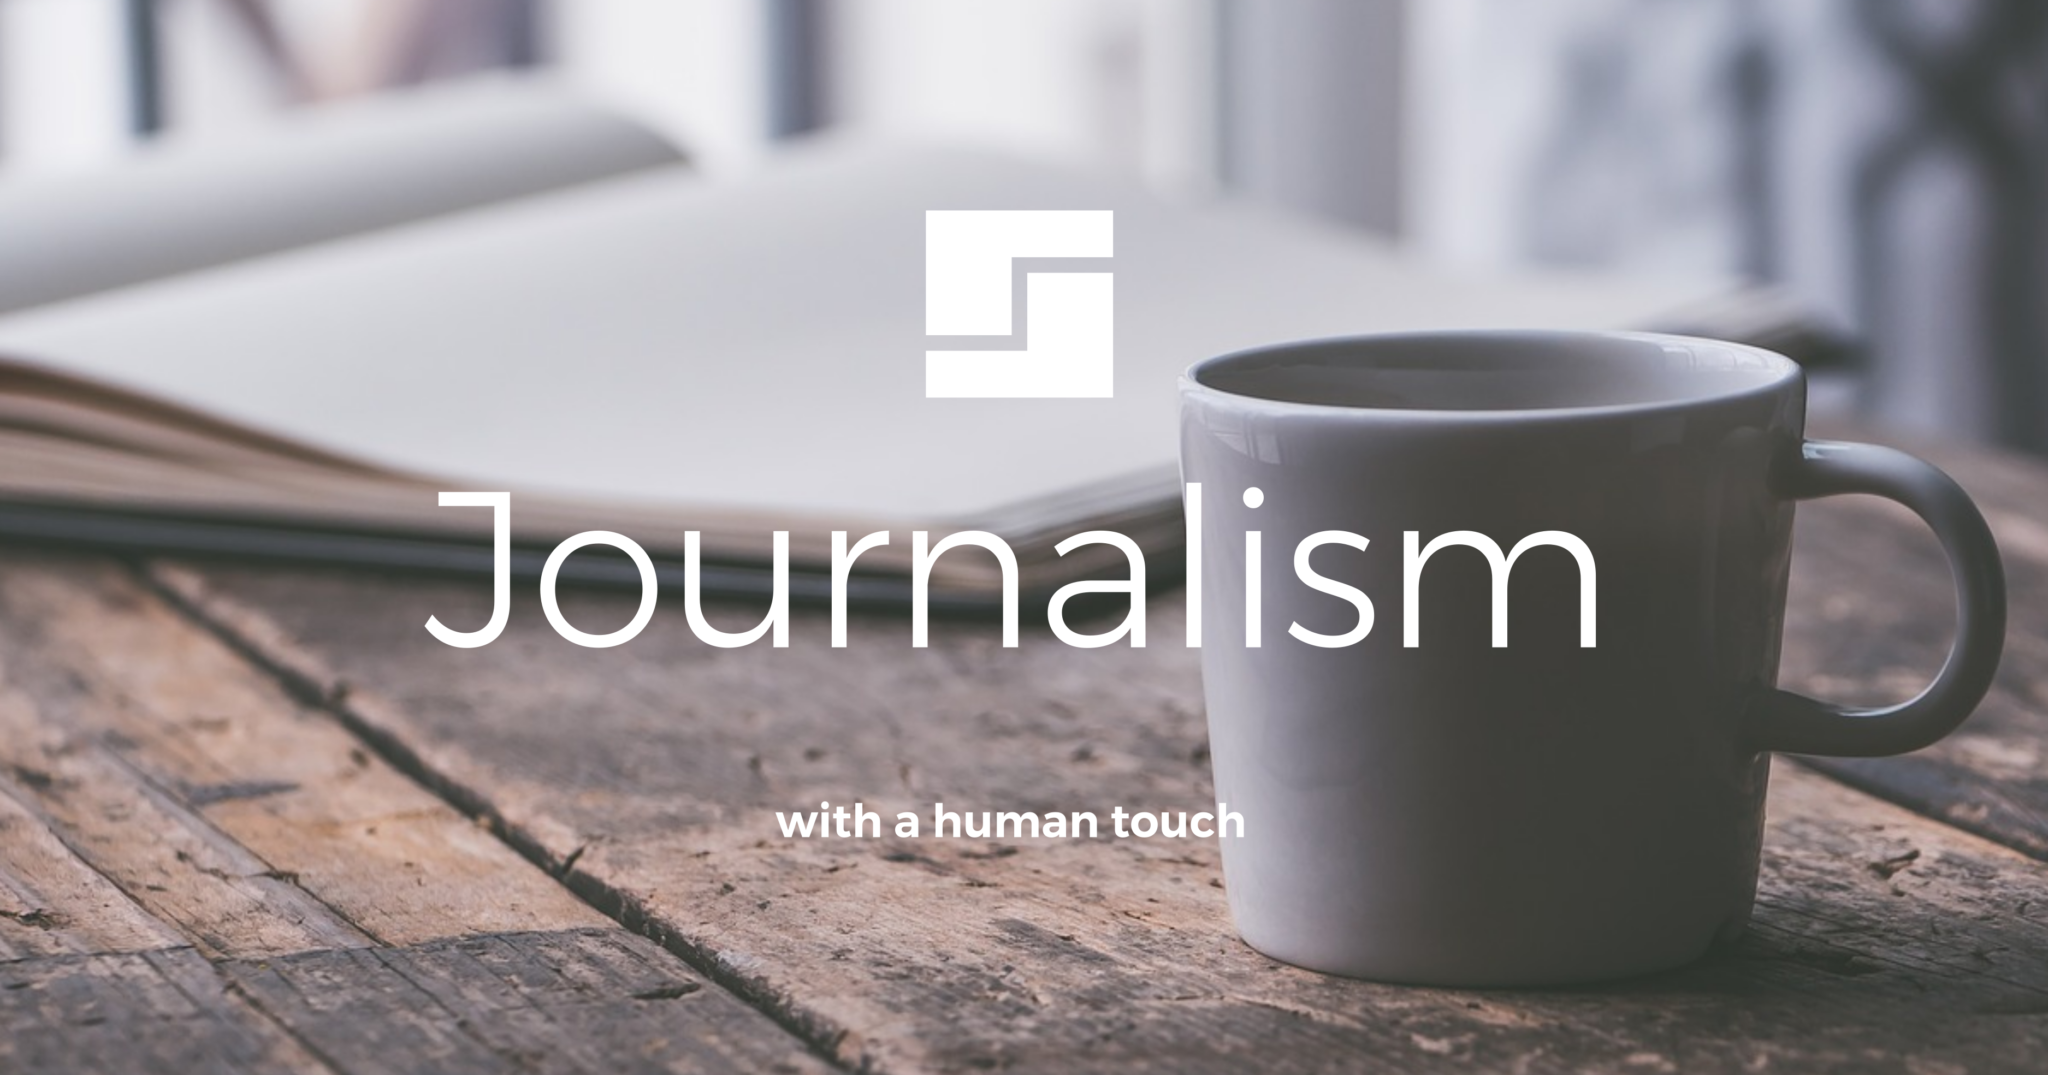 journalism with a human touch